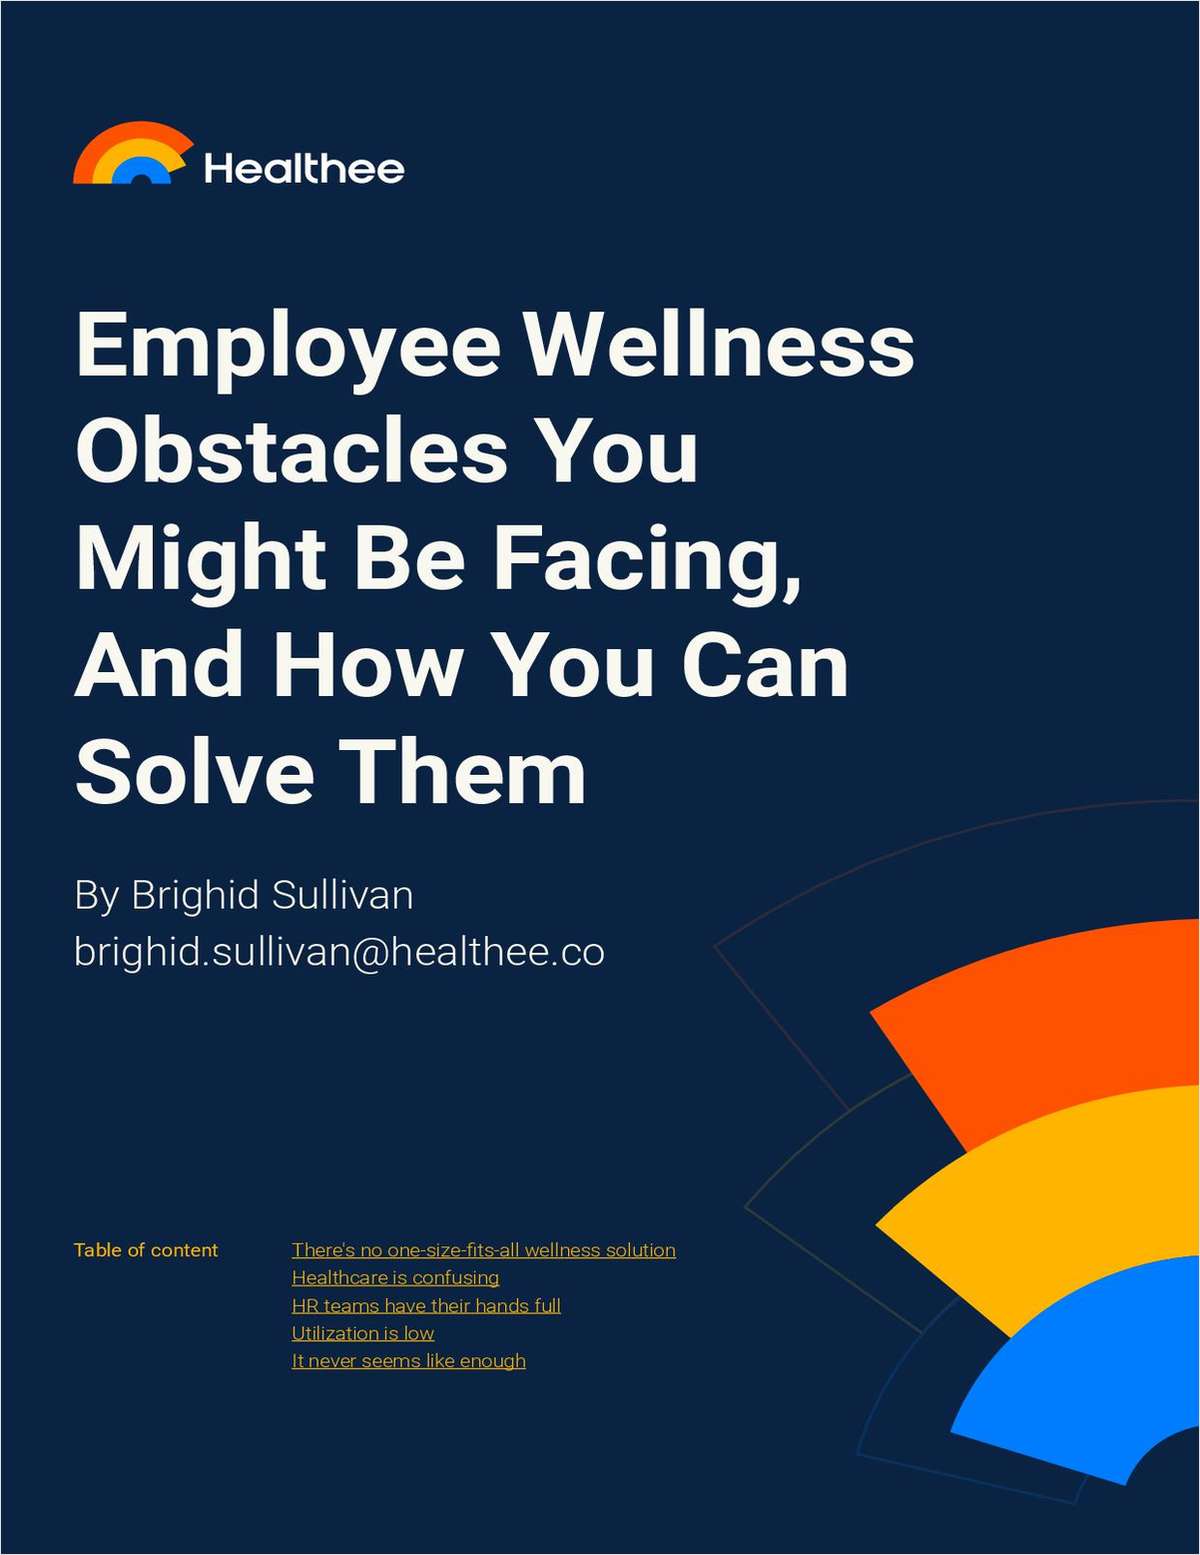 Employee Wellness Obstacles You Might Be Facing, And How You Can Solve Them